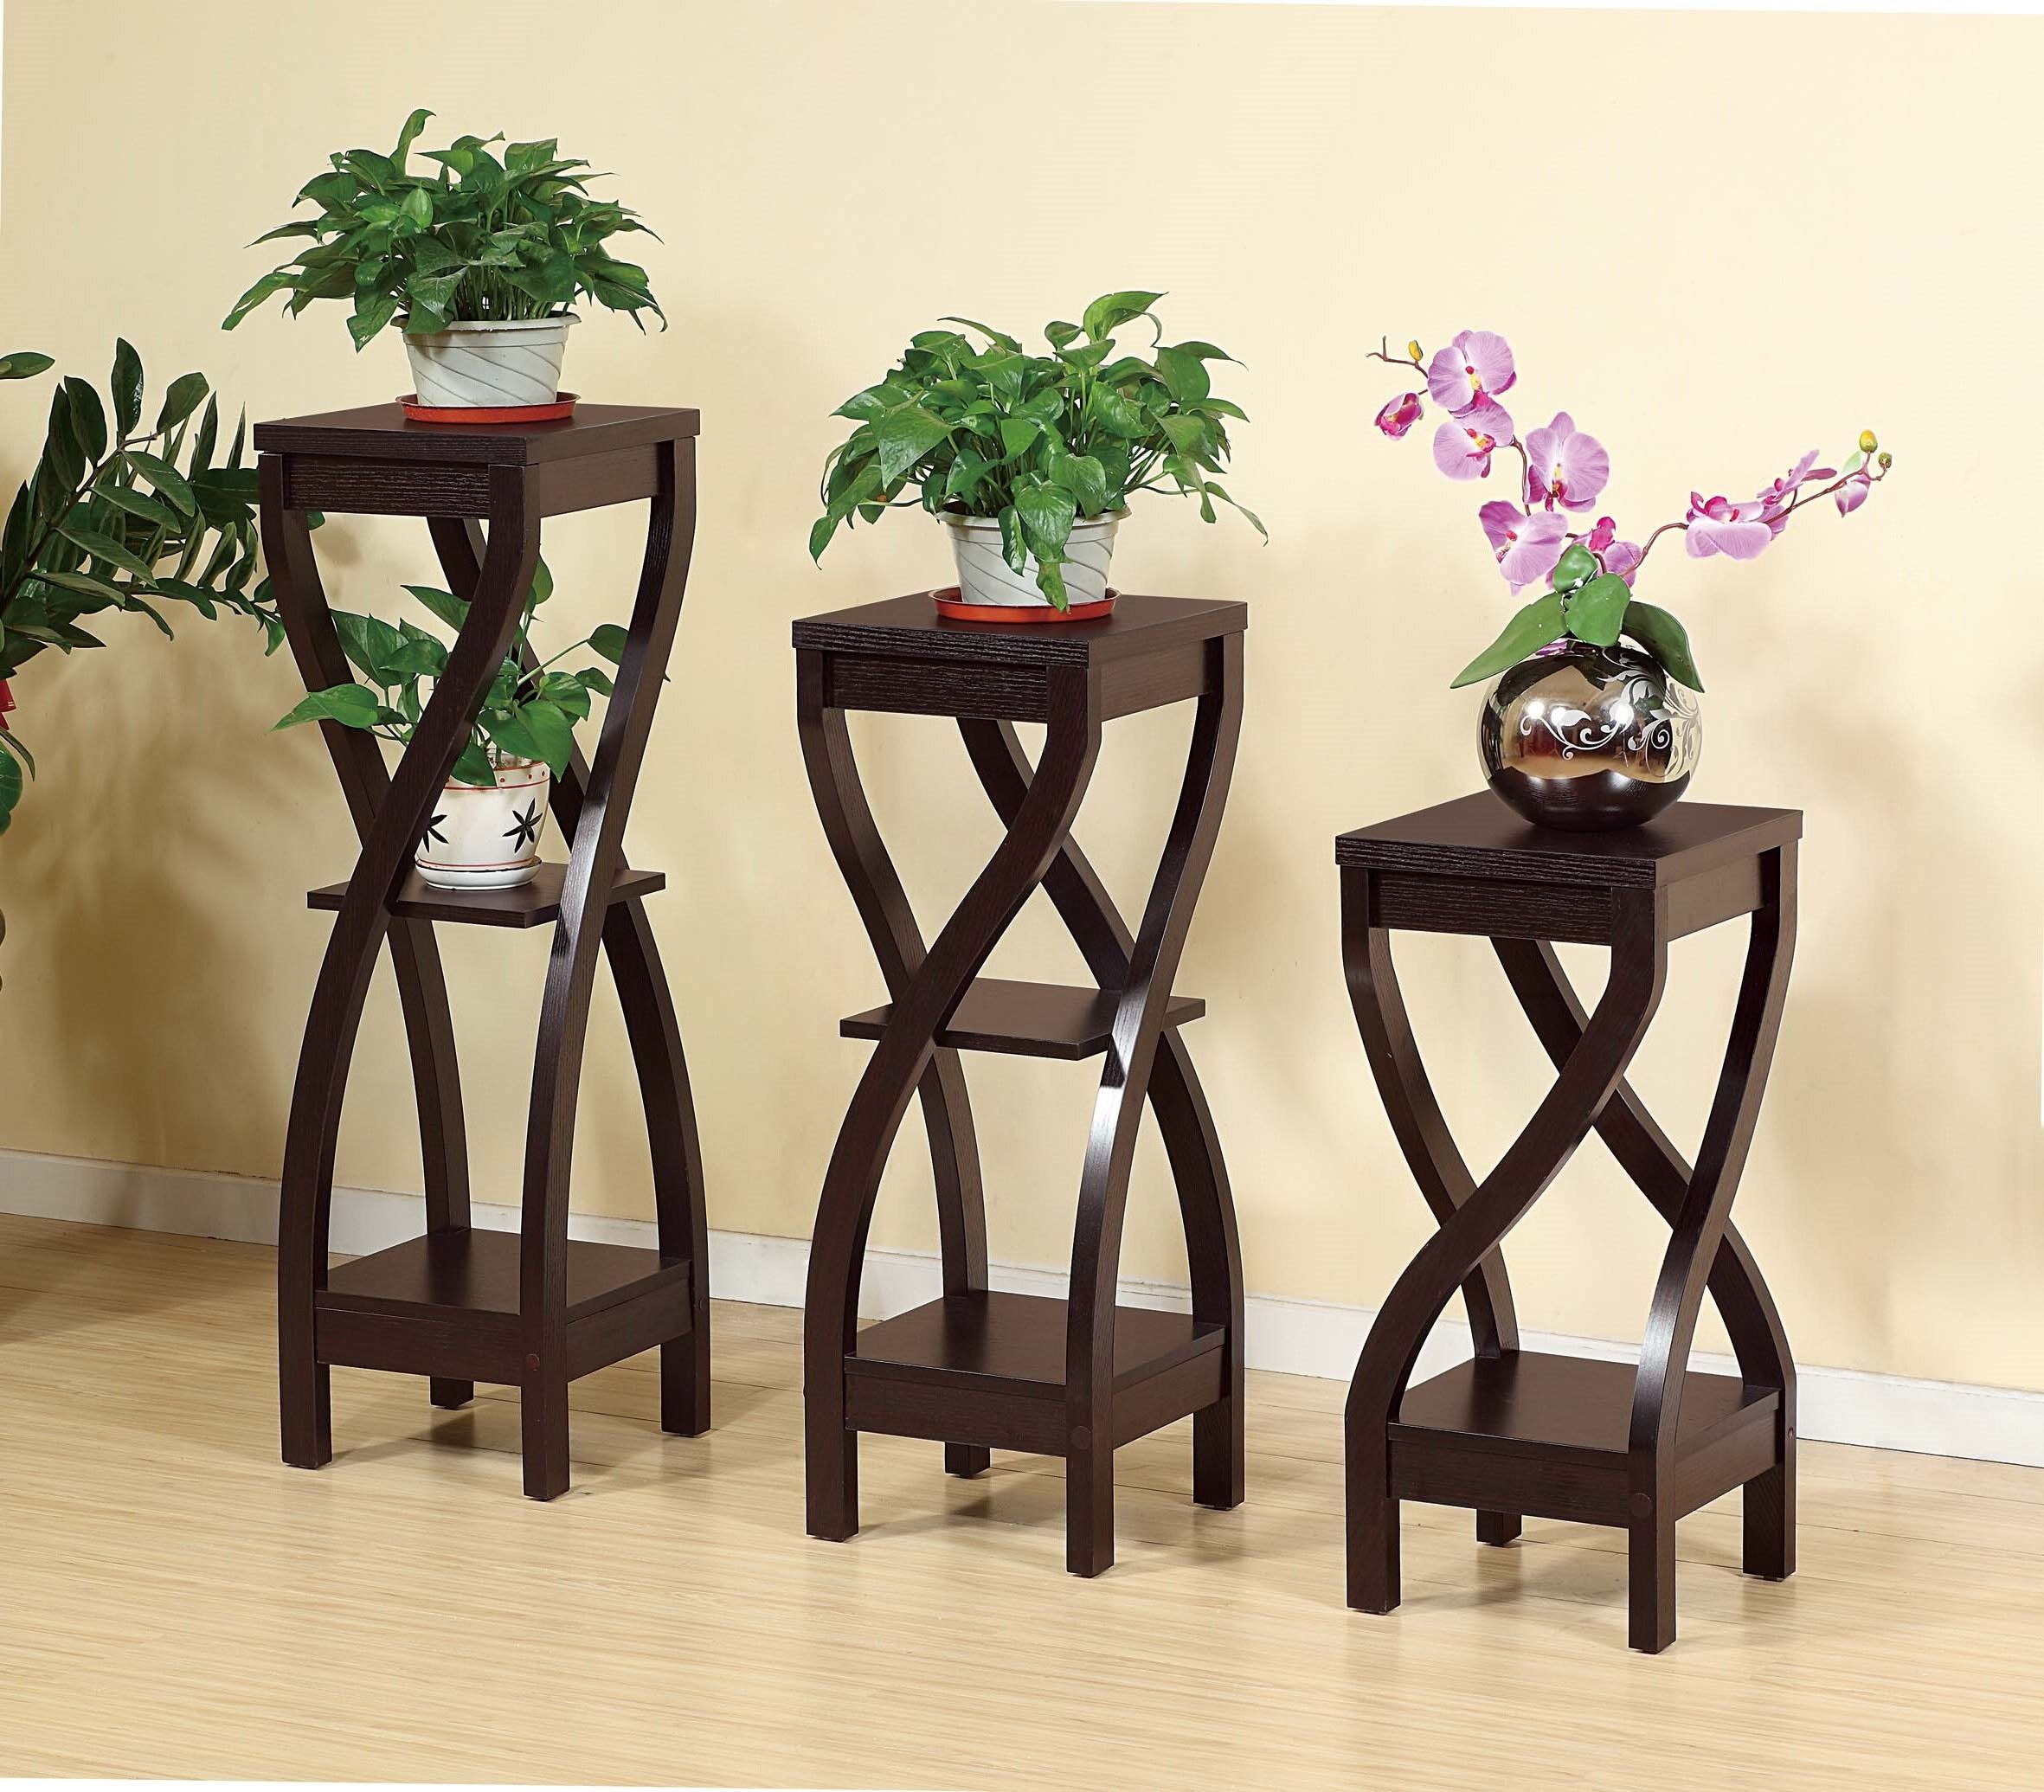 Wayfair With Regard To Medium Plant Stands (View 10 of 15)